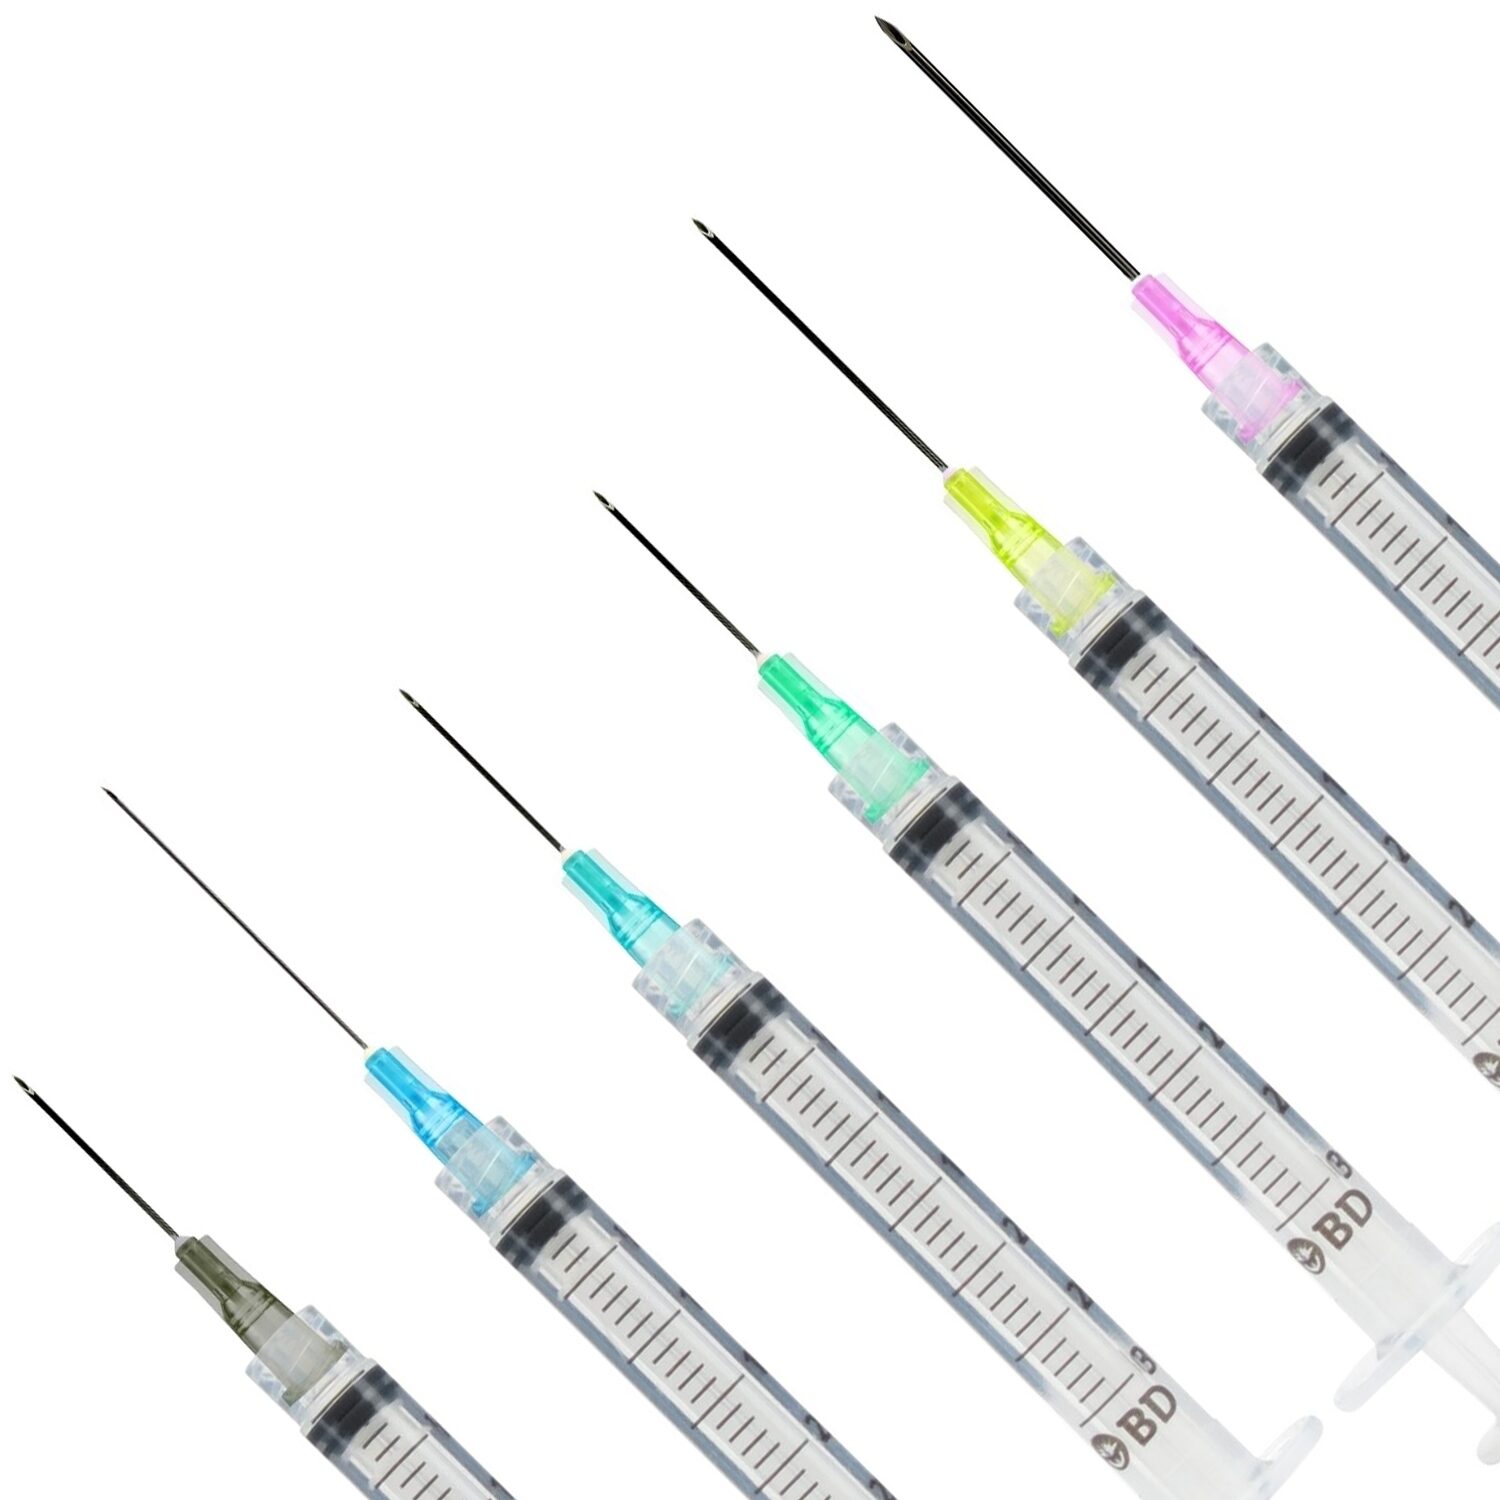 BD Luer-Lok Syringe with Detachable PrecisionGlide Needle 25g x 5/8, 3 ml (100 Count)